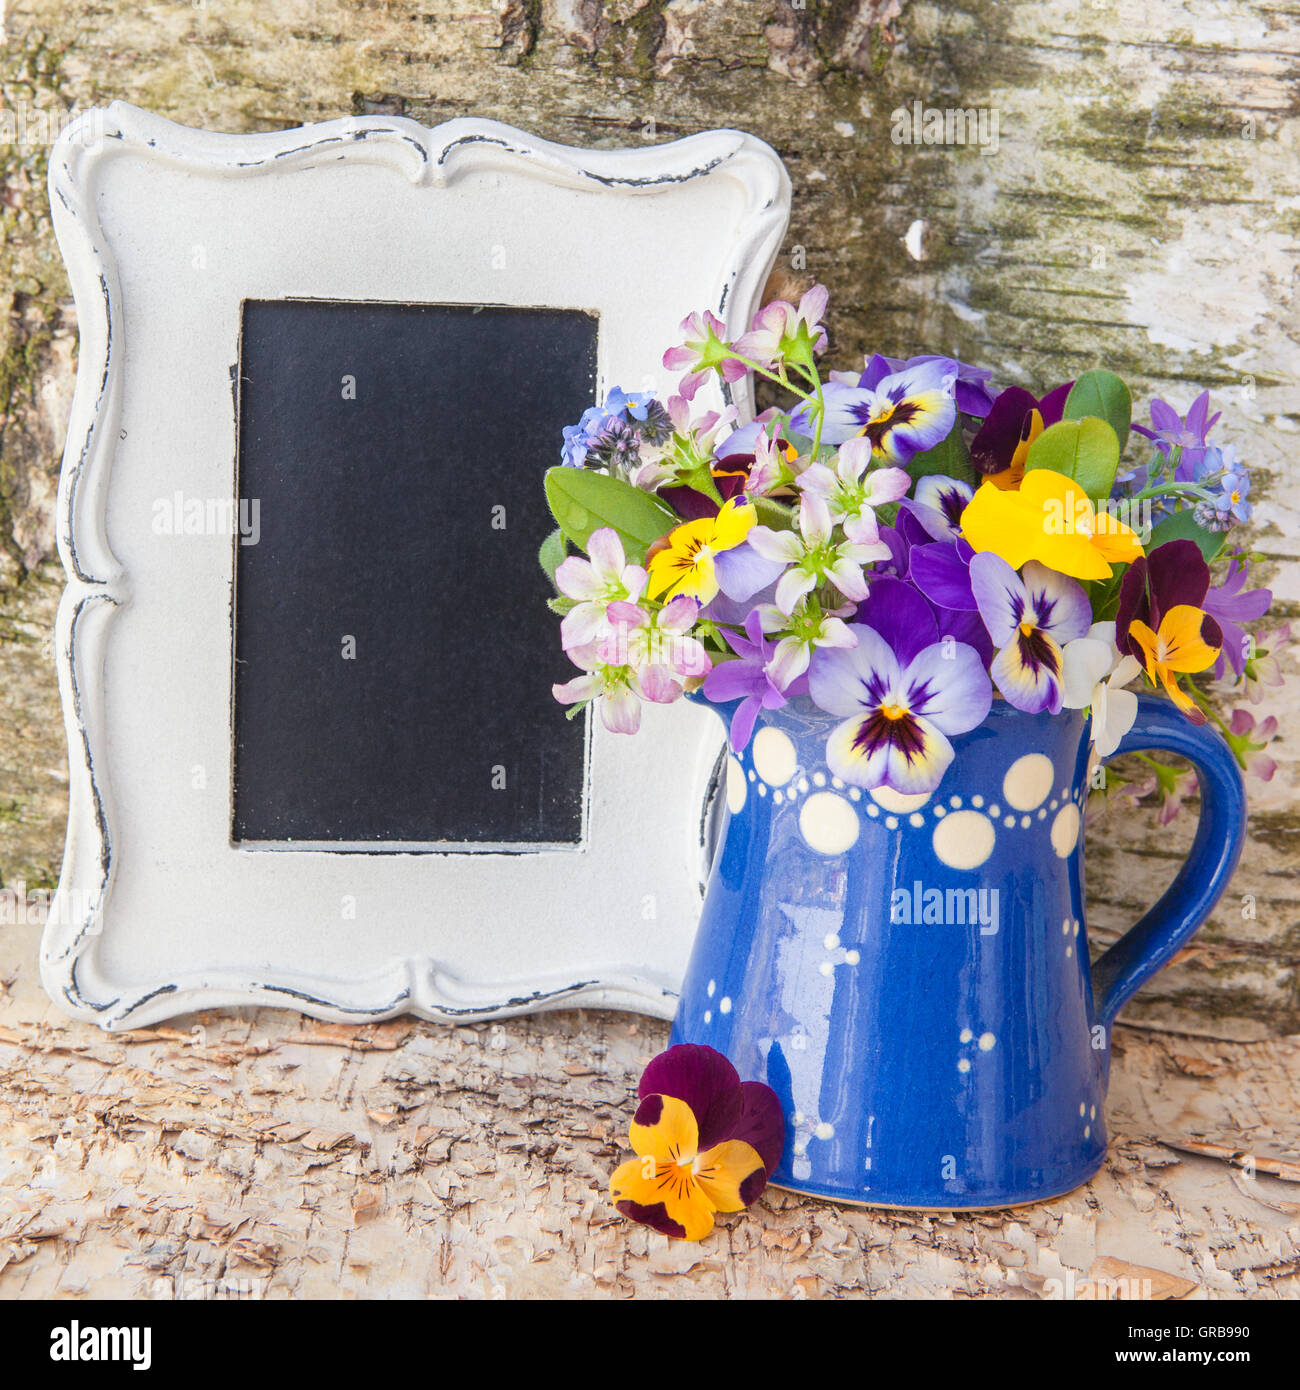 Colorful Spring Flowers Stock Photo - Alamy